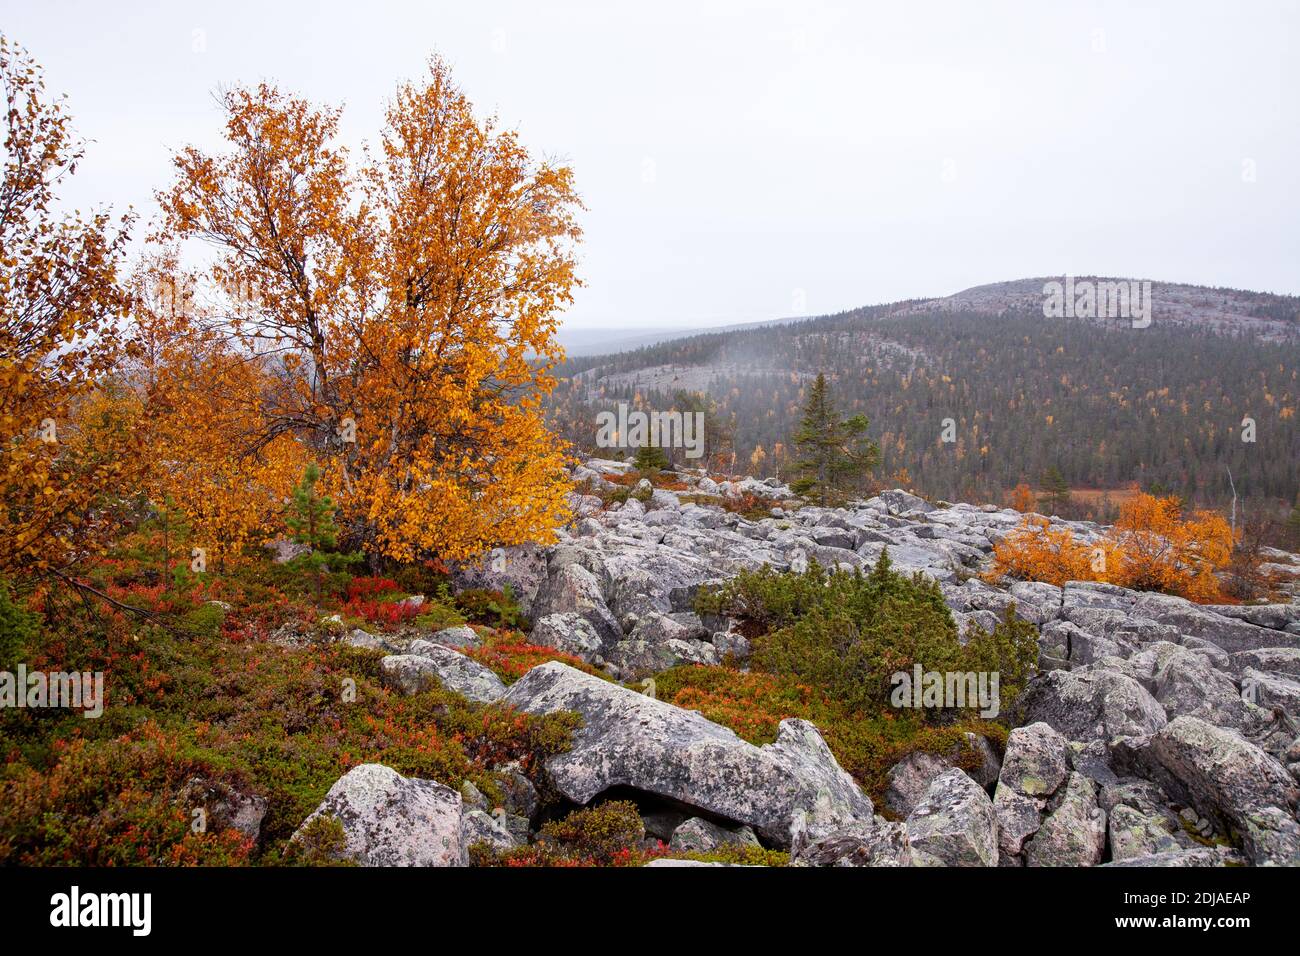 Colorful trees and bushes on a rocky hillside during fall foliage in Northern Finland near Salla. Stock Photo